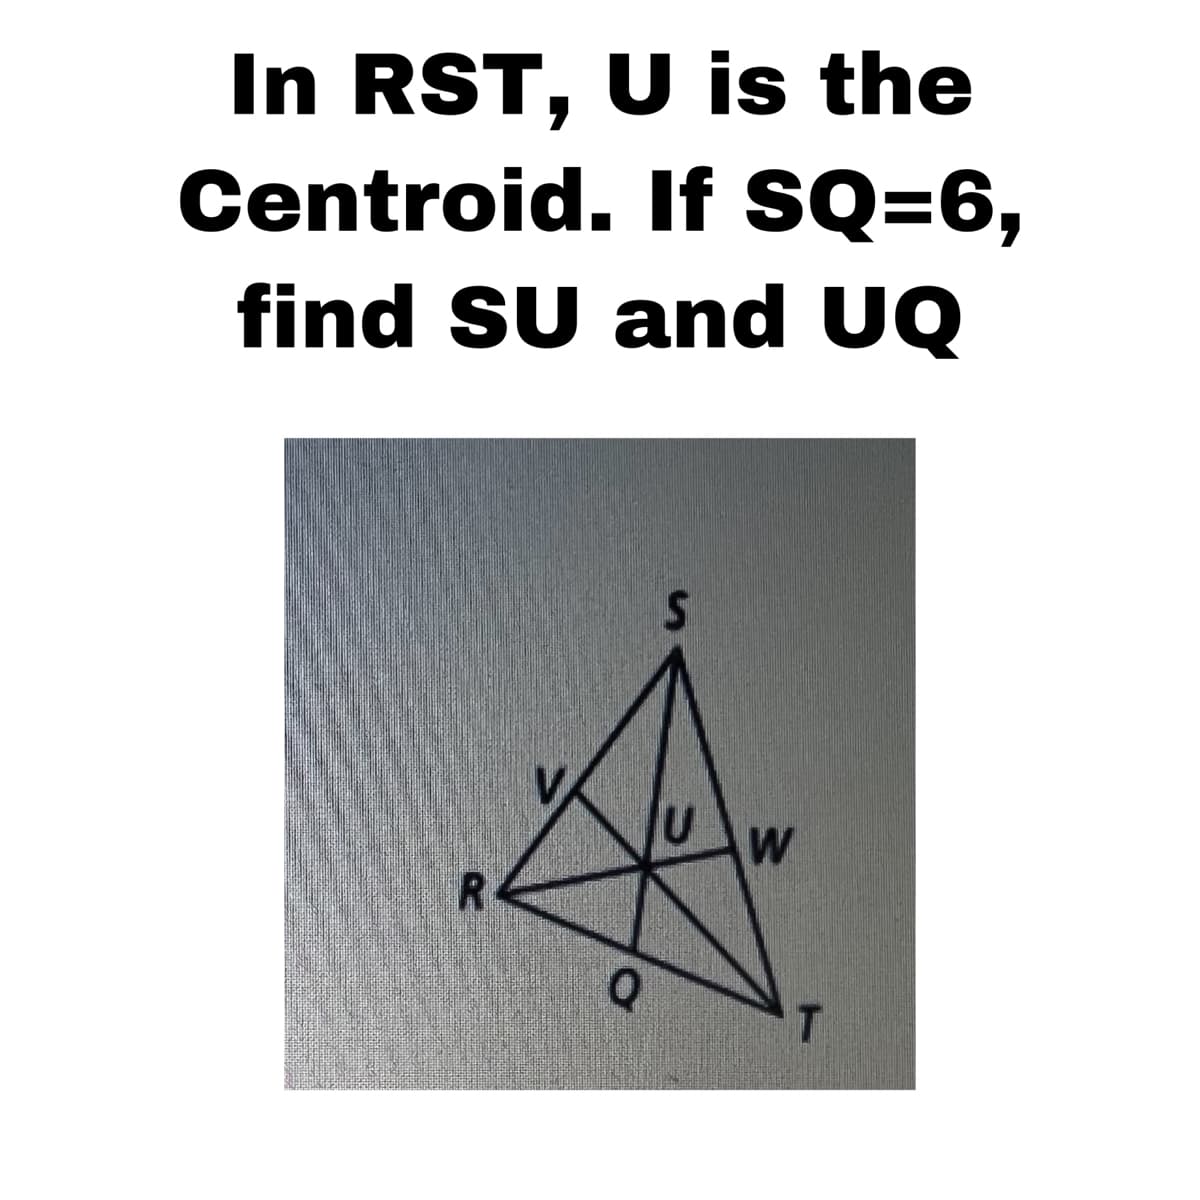 In RST, U is the
Centroid. If SQ=6,
find SU and UQ
W
